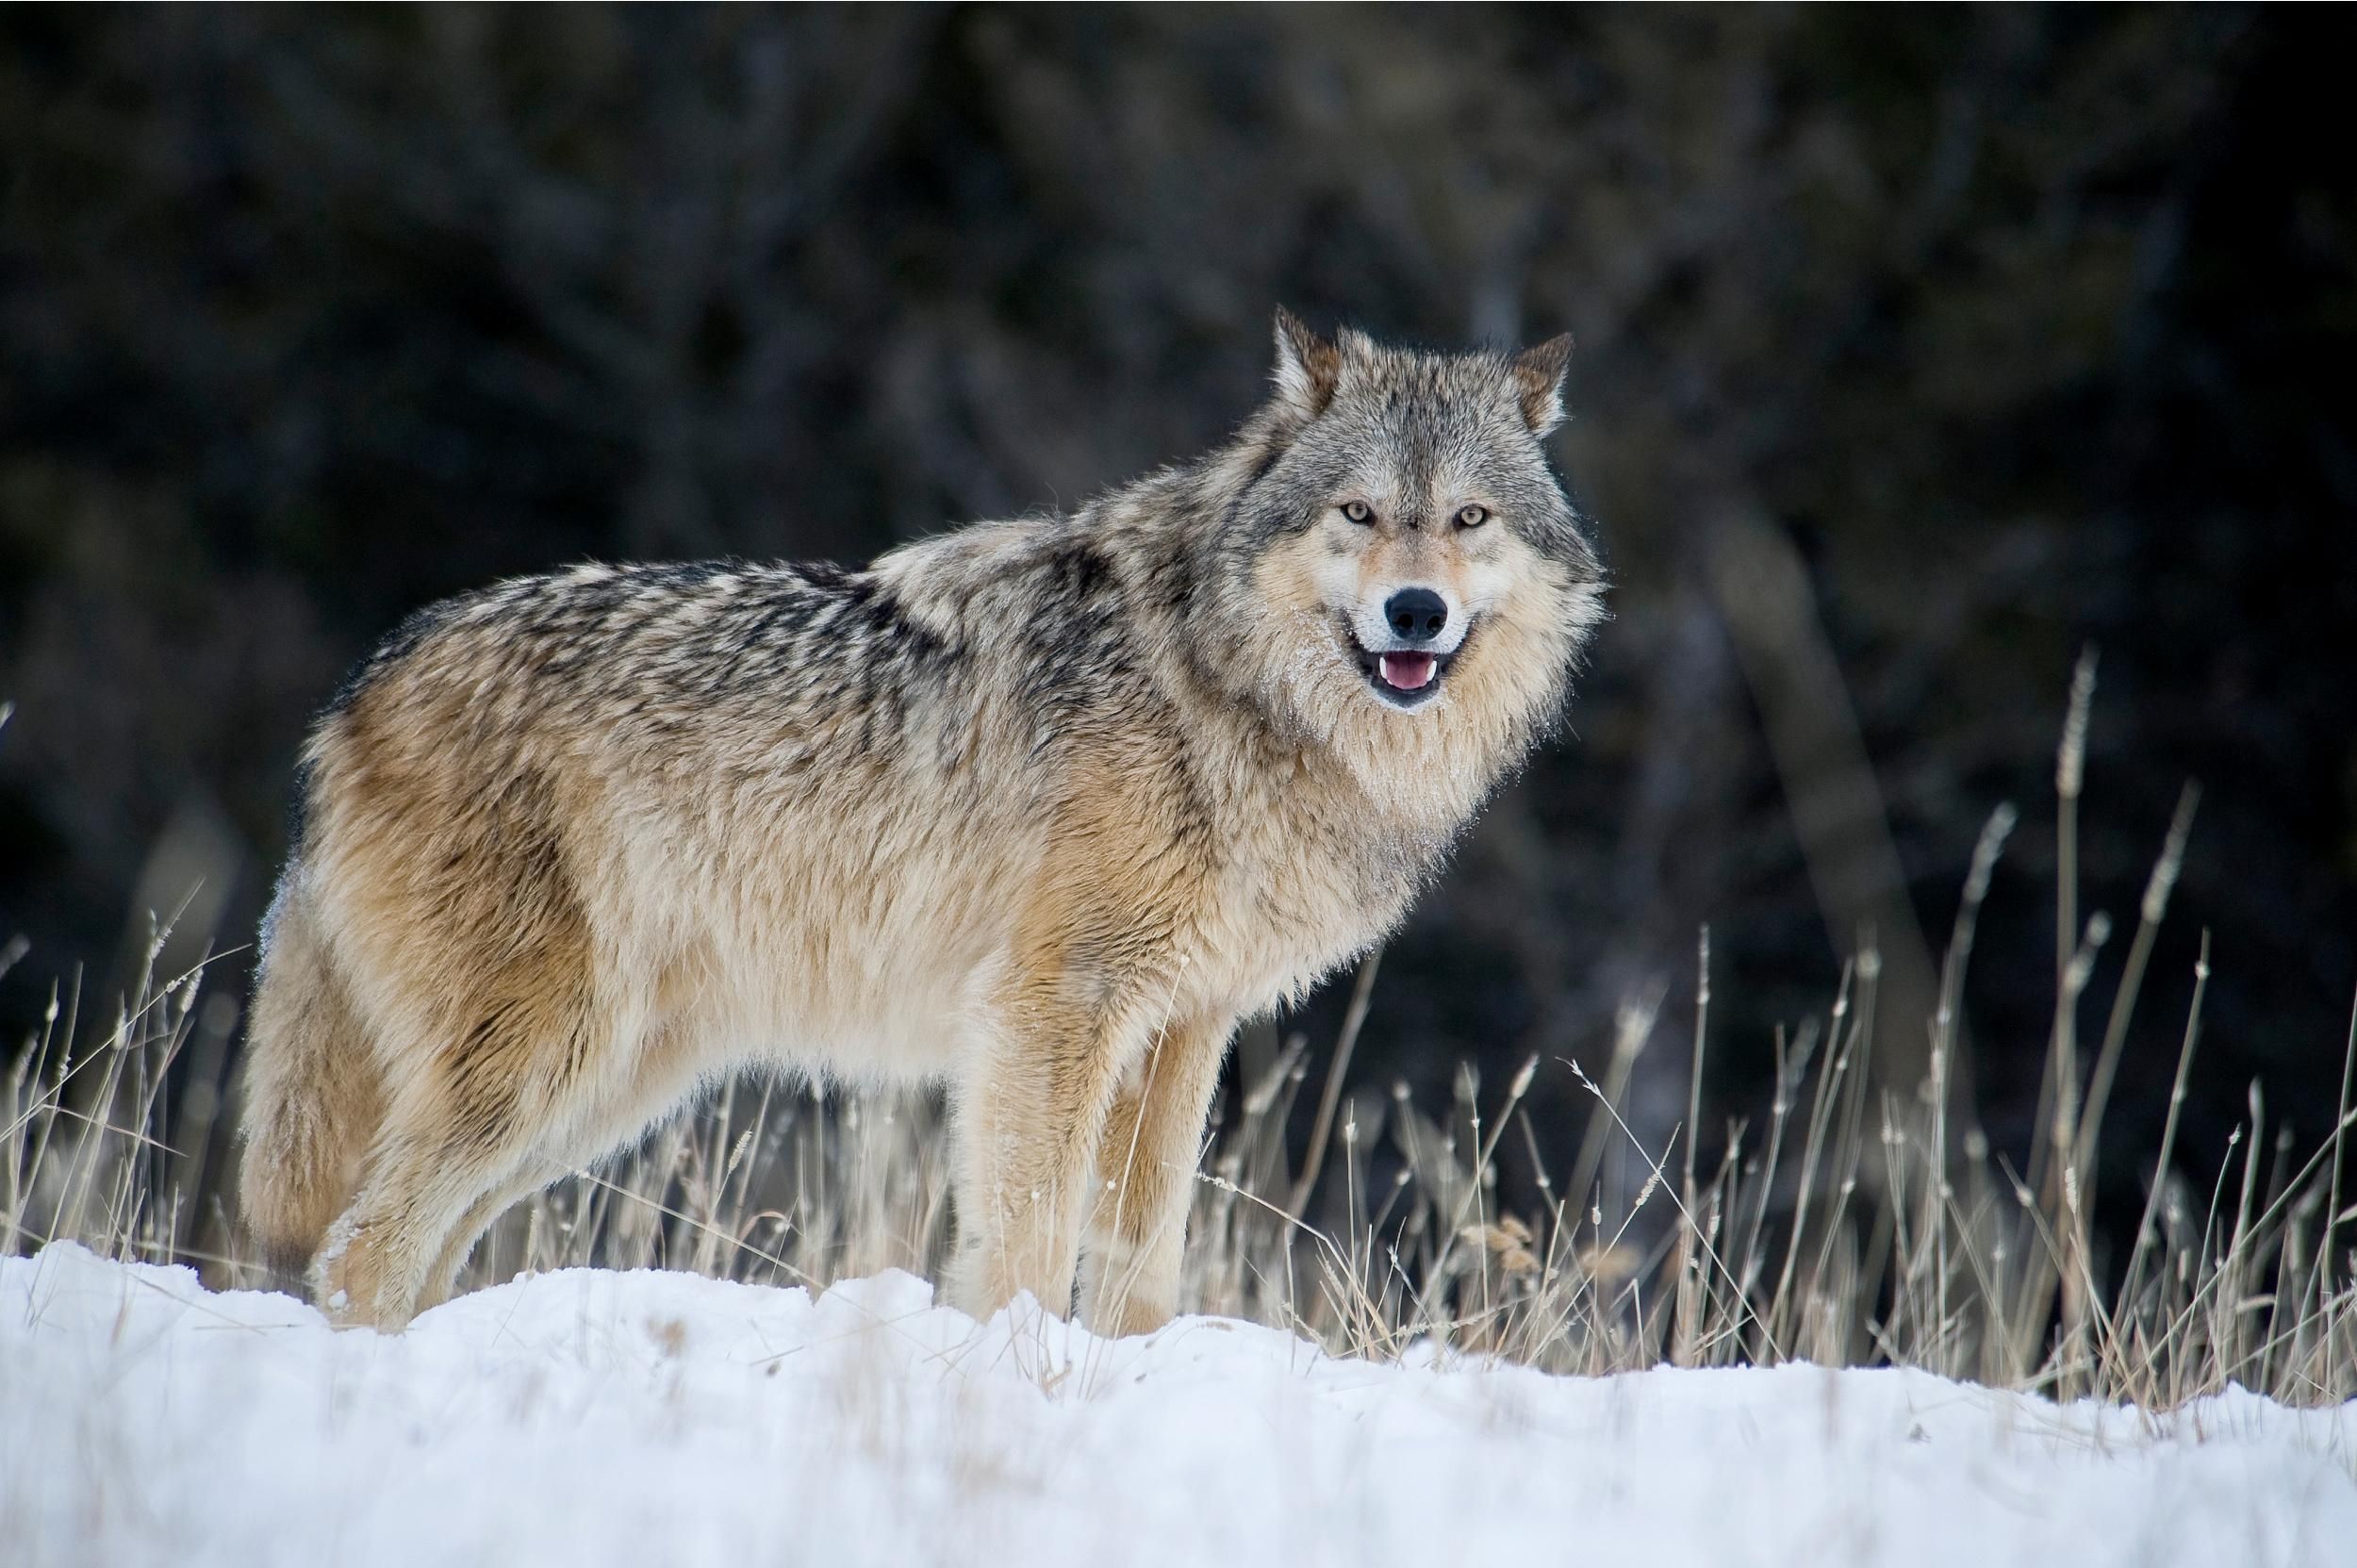 A male gray wolf walks through fresh snow in Montana. (Photp: Dennis Fast / VWPics/Universal Images Group via Getty Images)